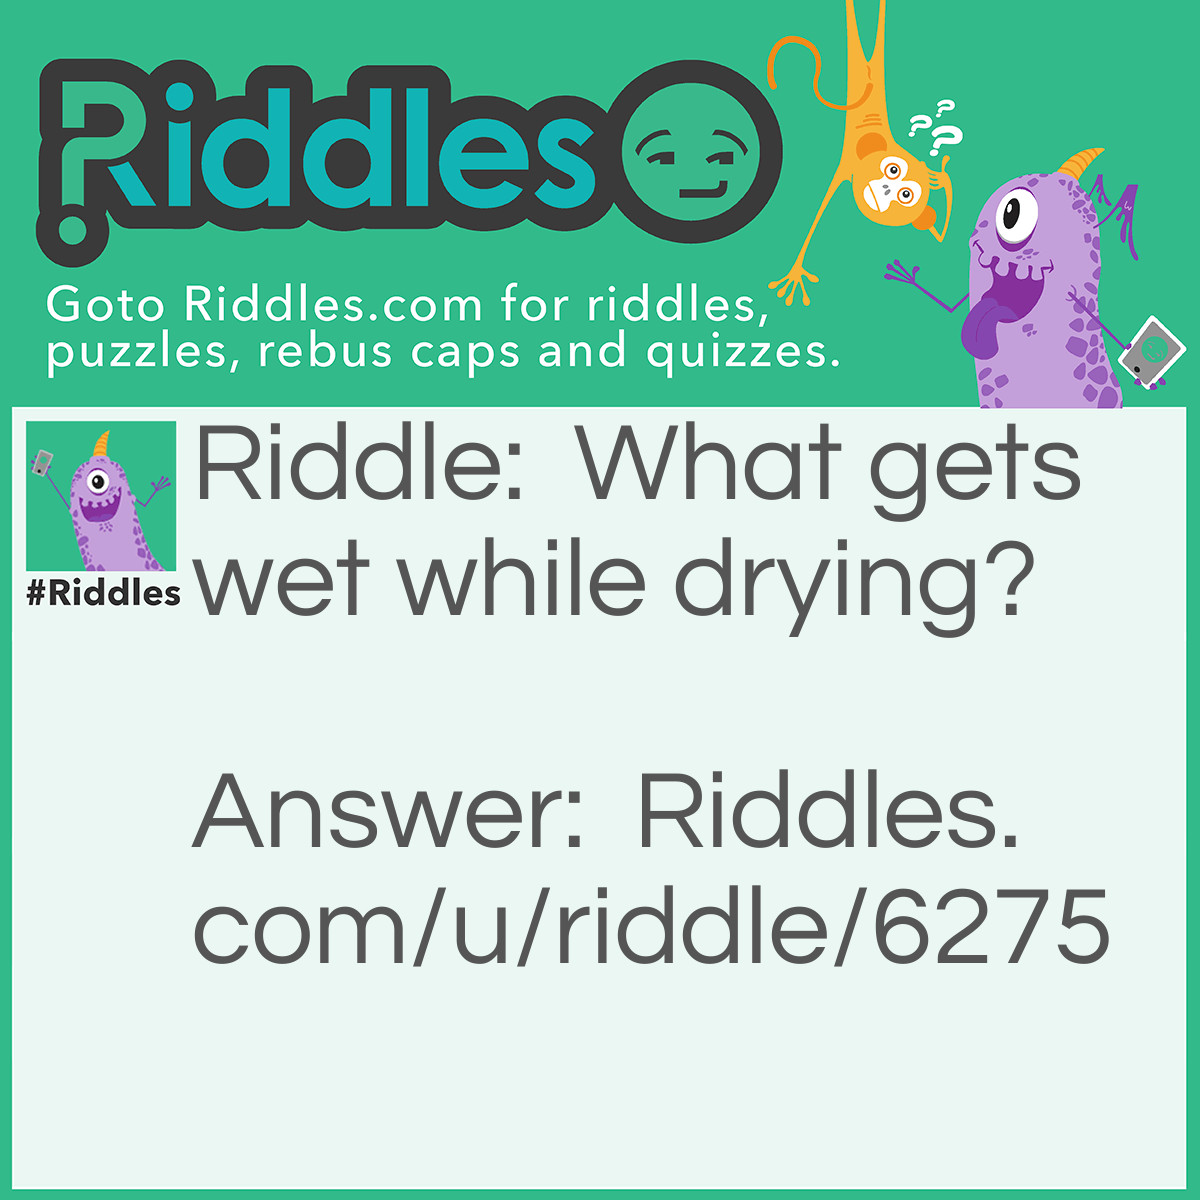 Riddle: What gets wet while drying? Answer: A bath towel.